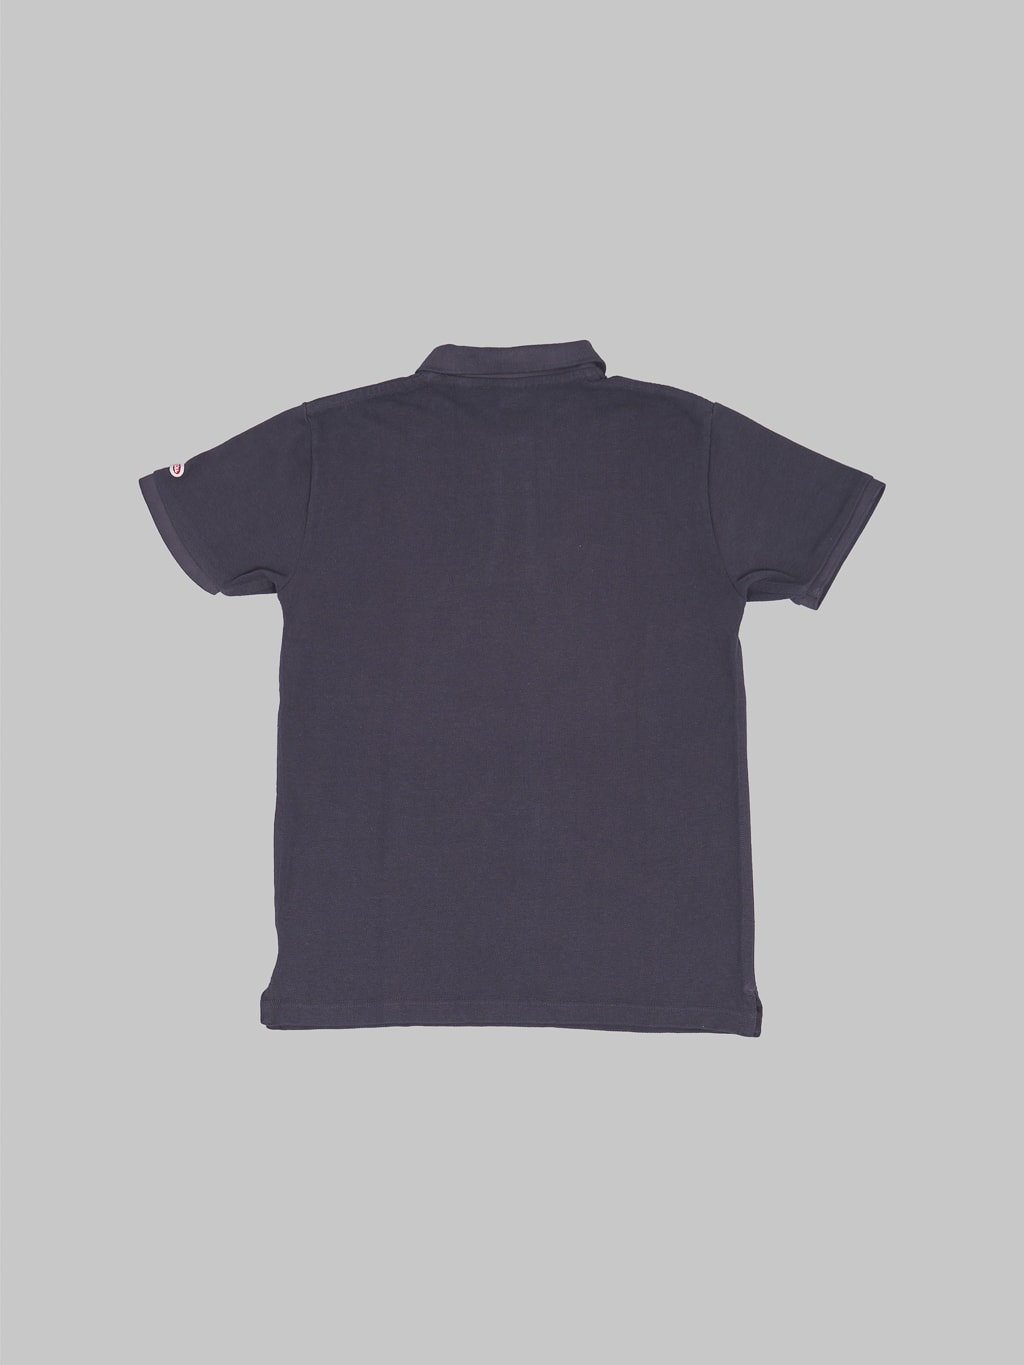 ues polo shirt navy back view